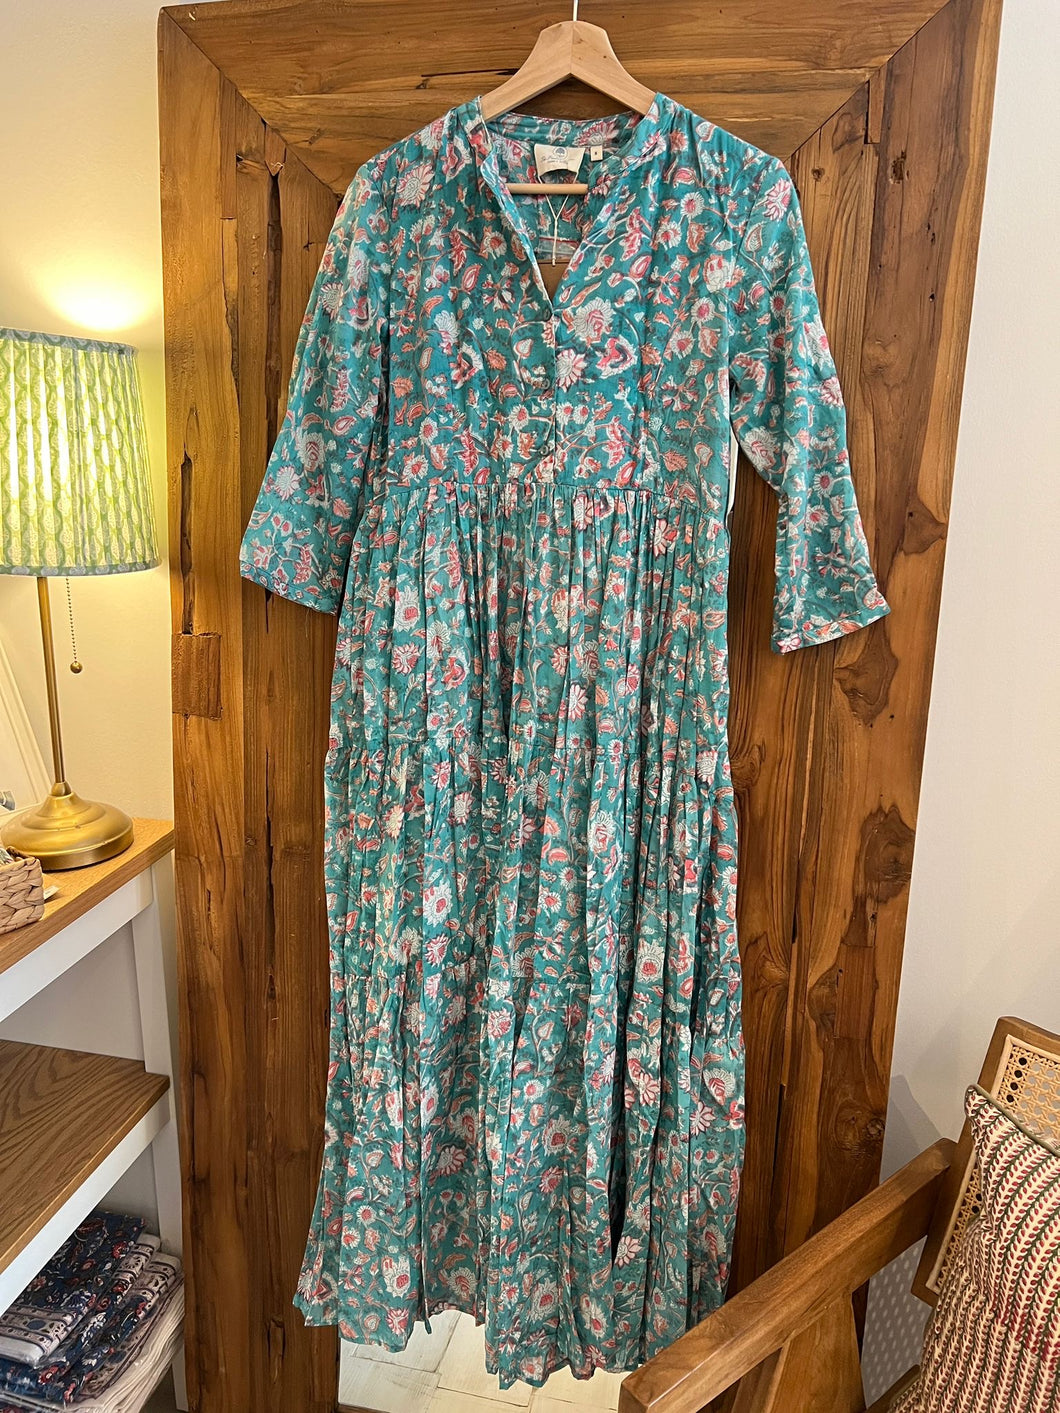 The Pepper dress with lining - turquoise floral